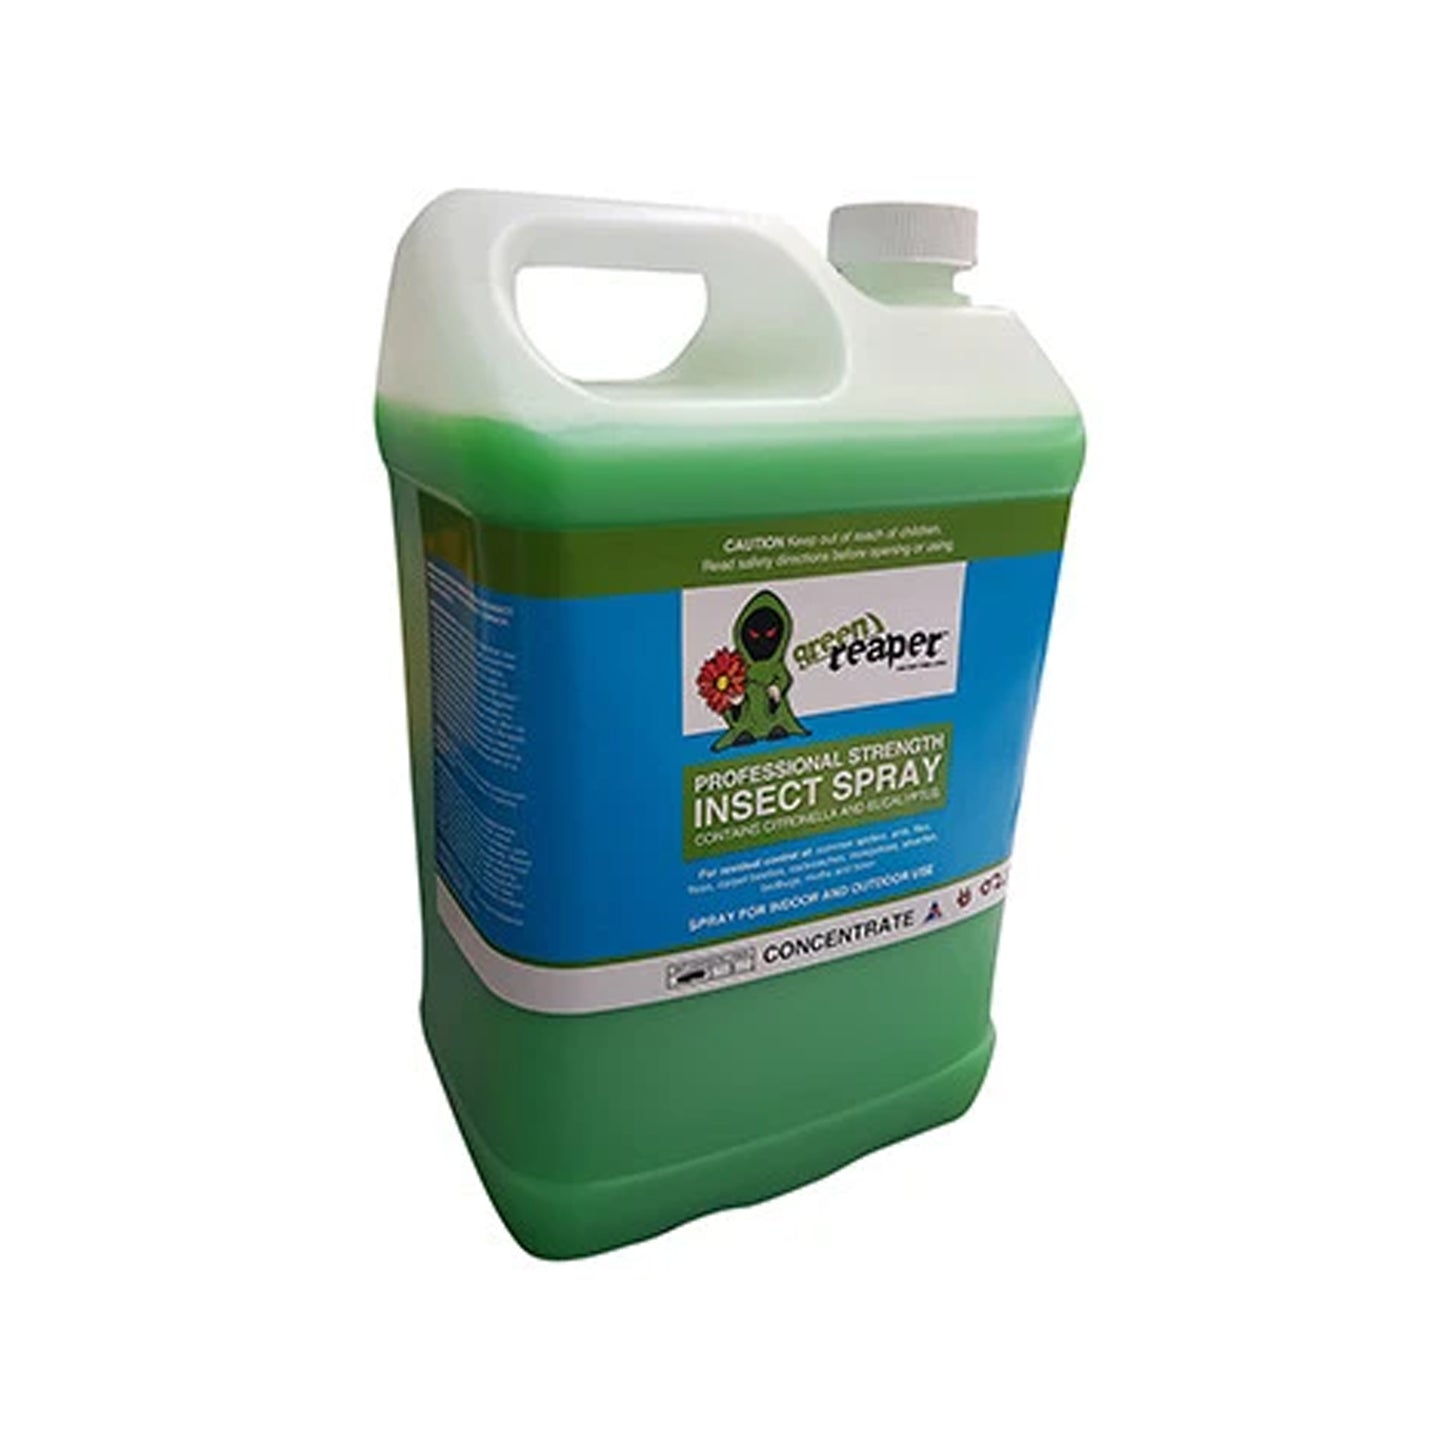 Green Reaper Insect Spray 5 Litre For Flies, Spiders, Mosquitoes, Bed Bugs & More